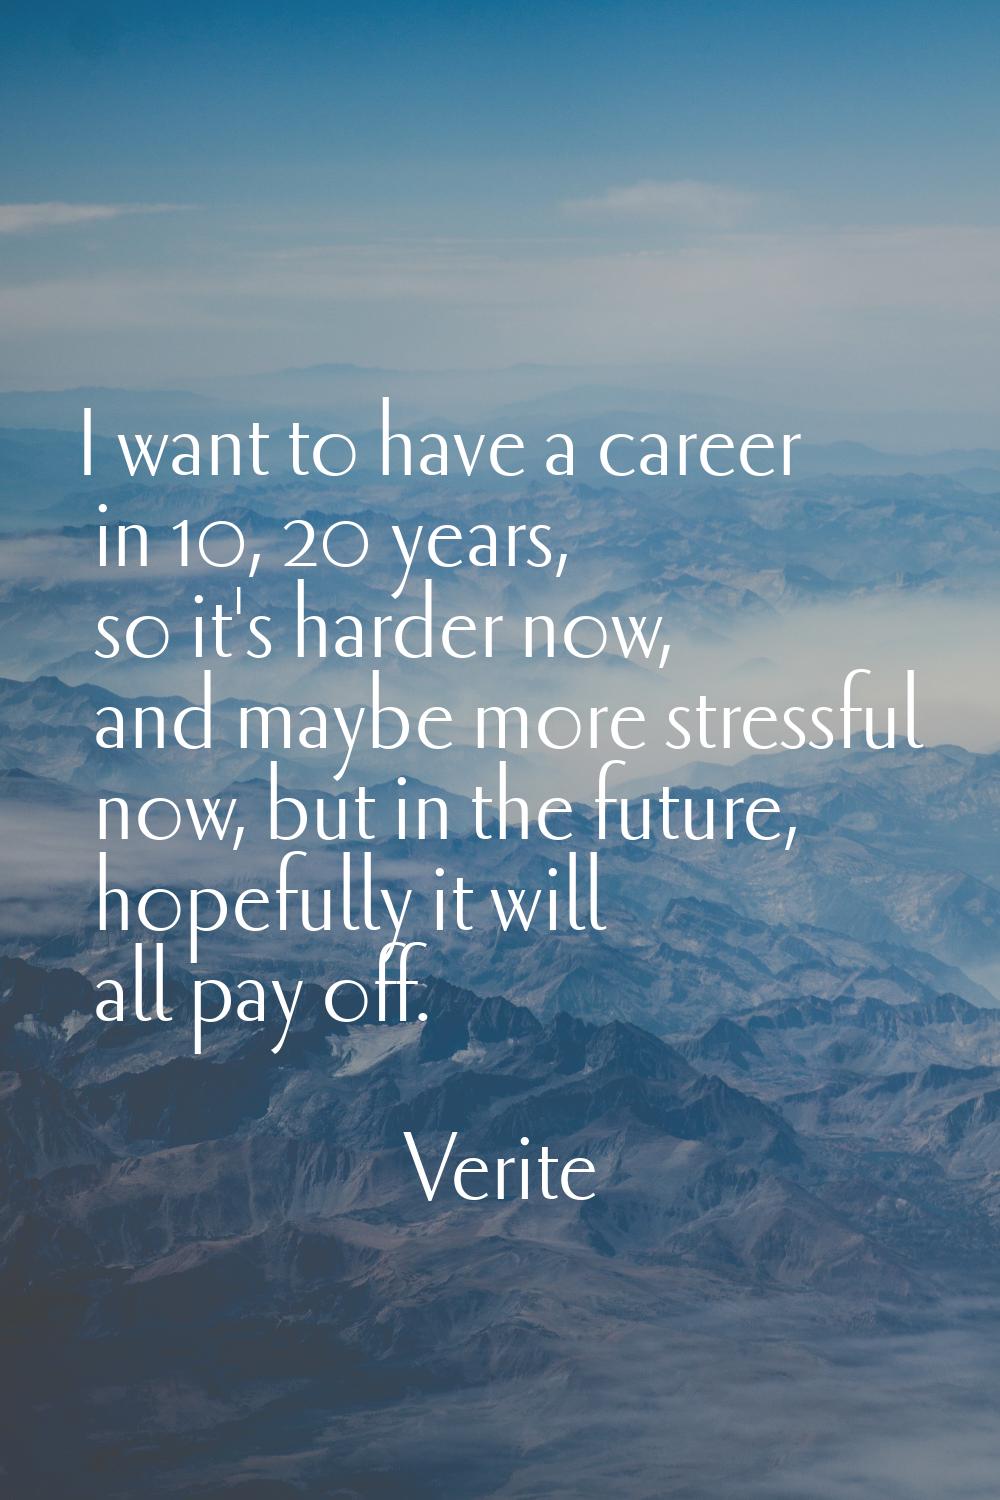 I want to have a career in 10, 20 years, so it's harder now, and maybe more stressful now, but in t